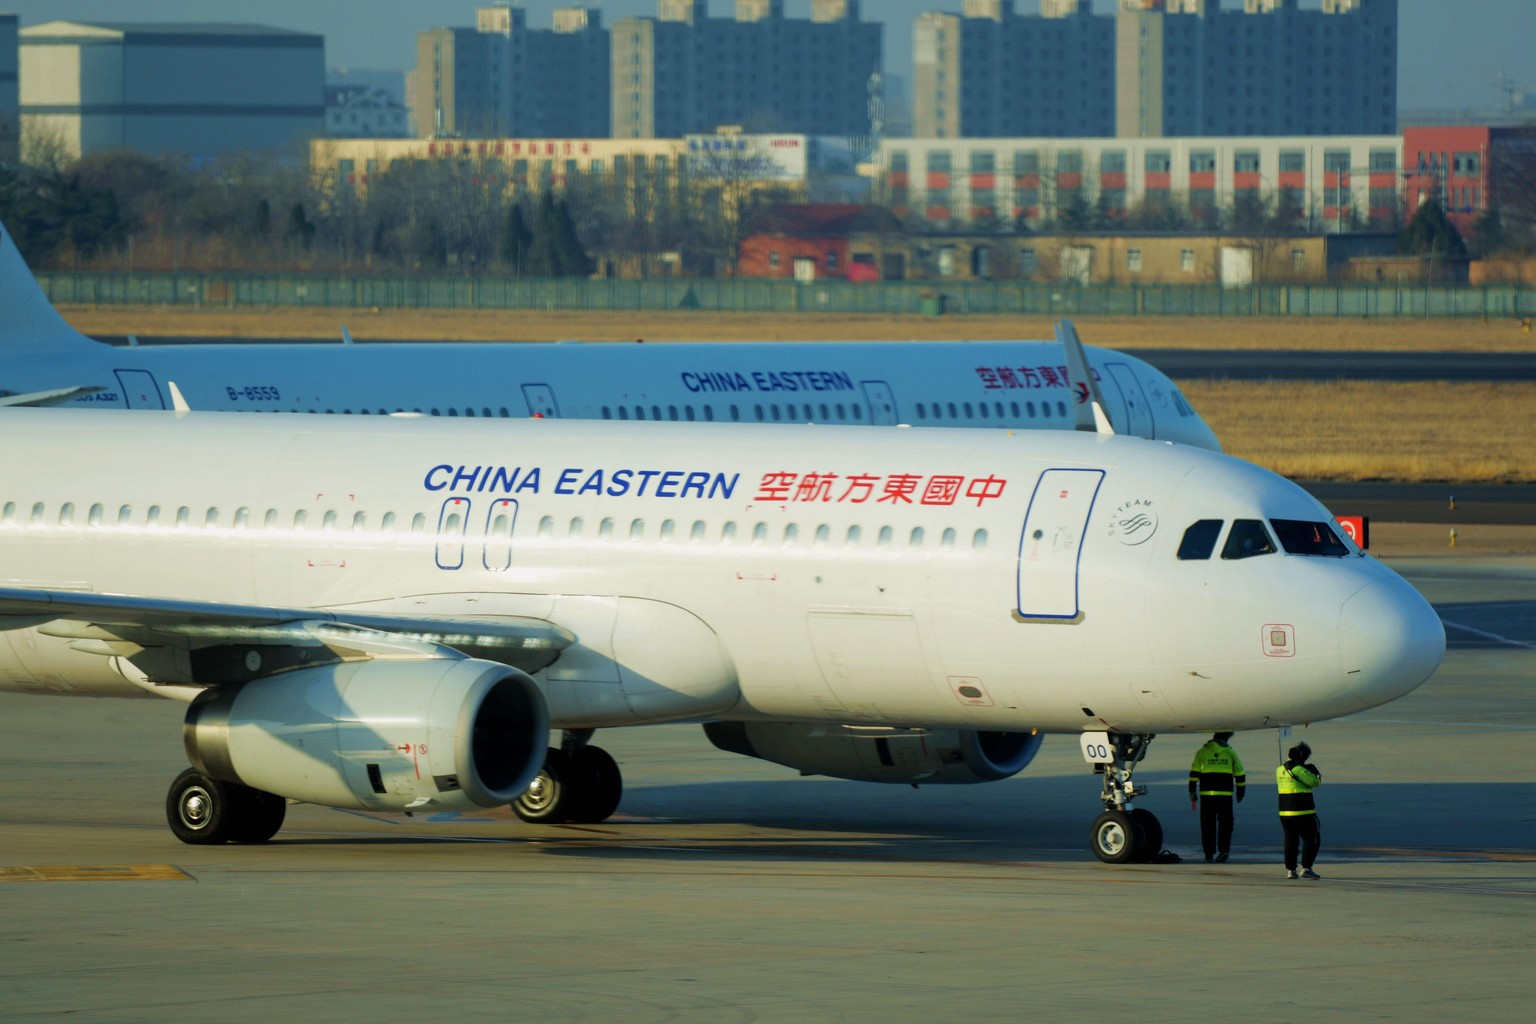 QINGDAO, CHINA - FEBRUARY 21, 2021 - Ground staff check a China Eastern Airlines passenger plane before it takes off at the Liuting Airport in Qingdao, Shandong province, China, Feb 21, 2021.